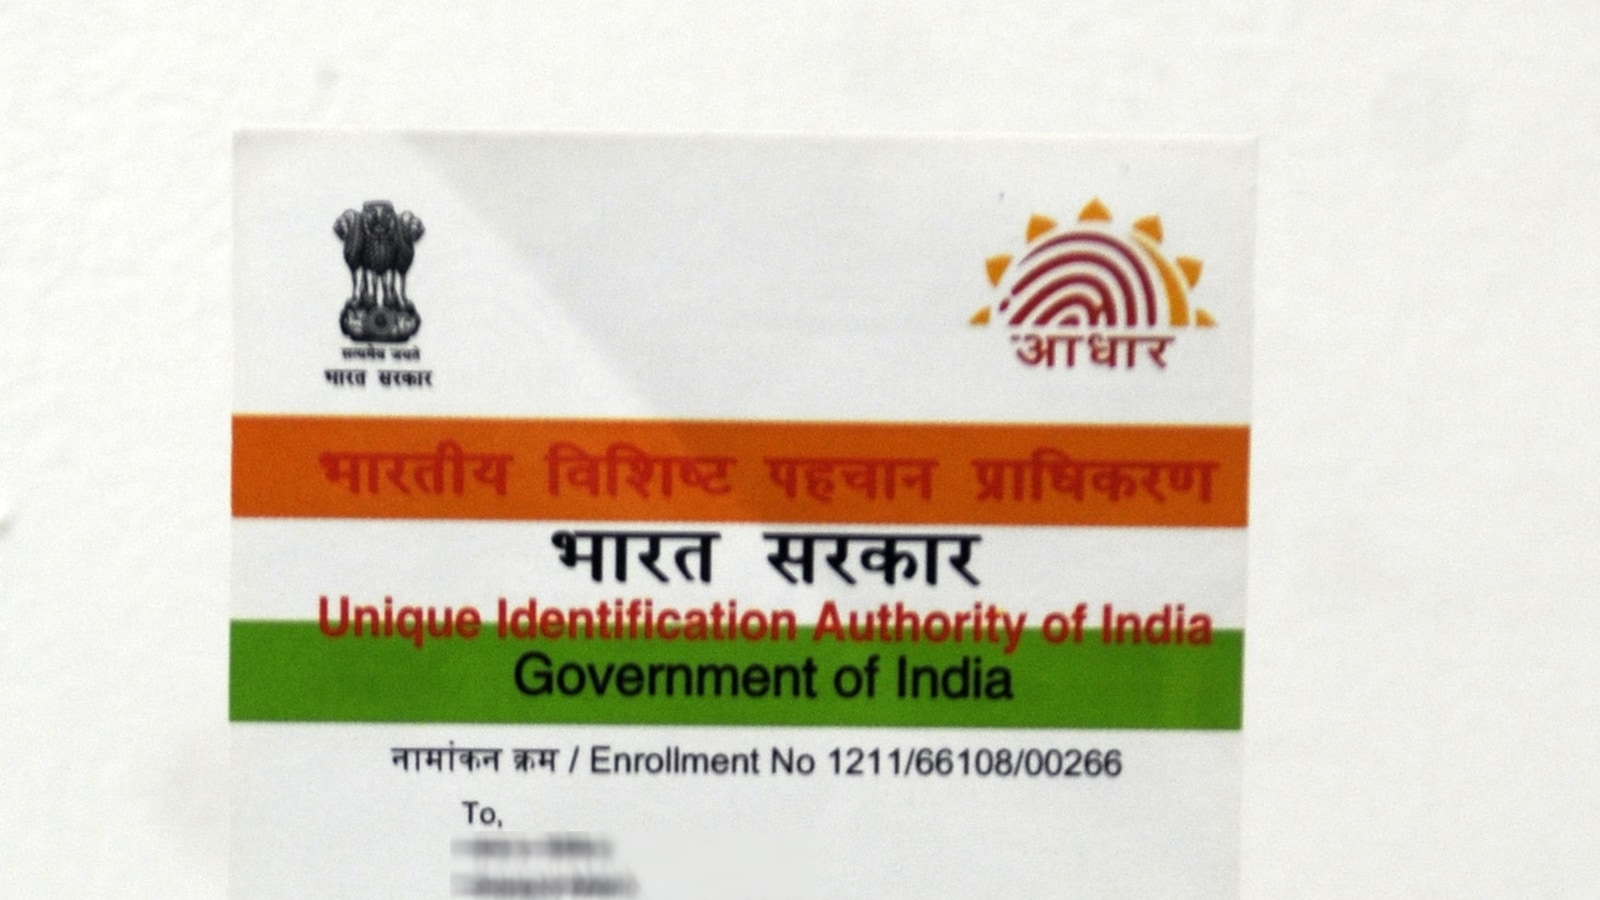 aadhaar private vetting: Aadhaar vetting by private entities against  Supreme Court ruling: Experts - The Economic Times